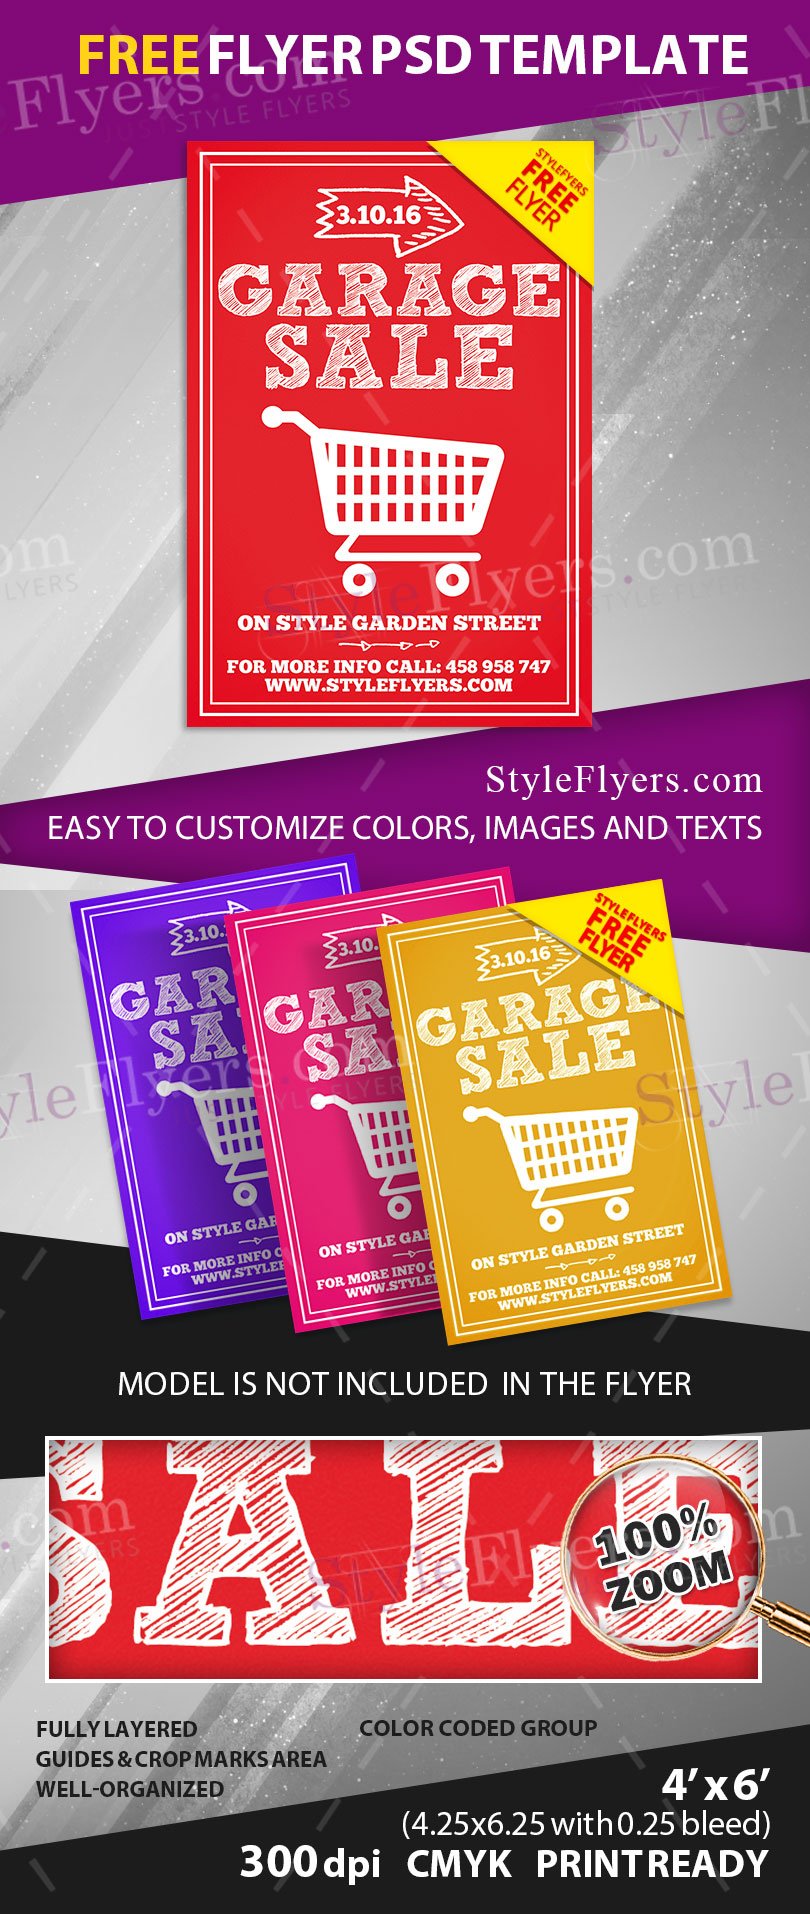 preview_garage_sale_psd_flyer_template